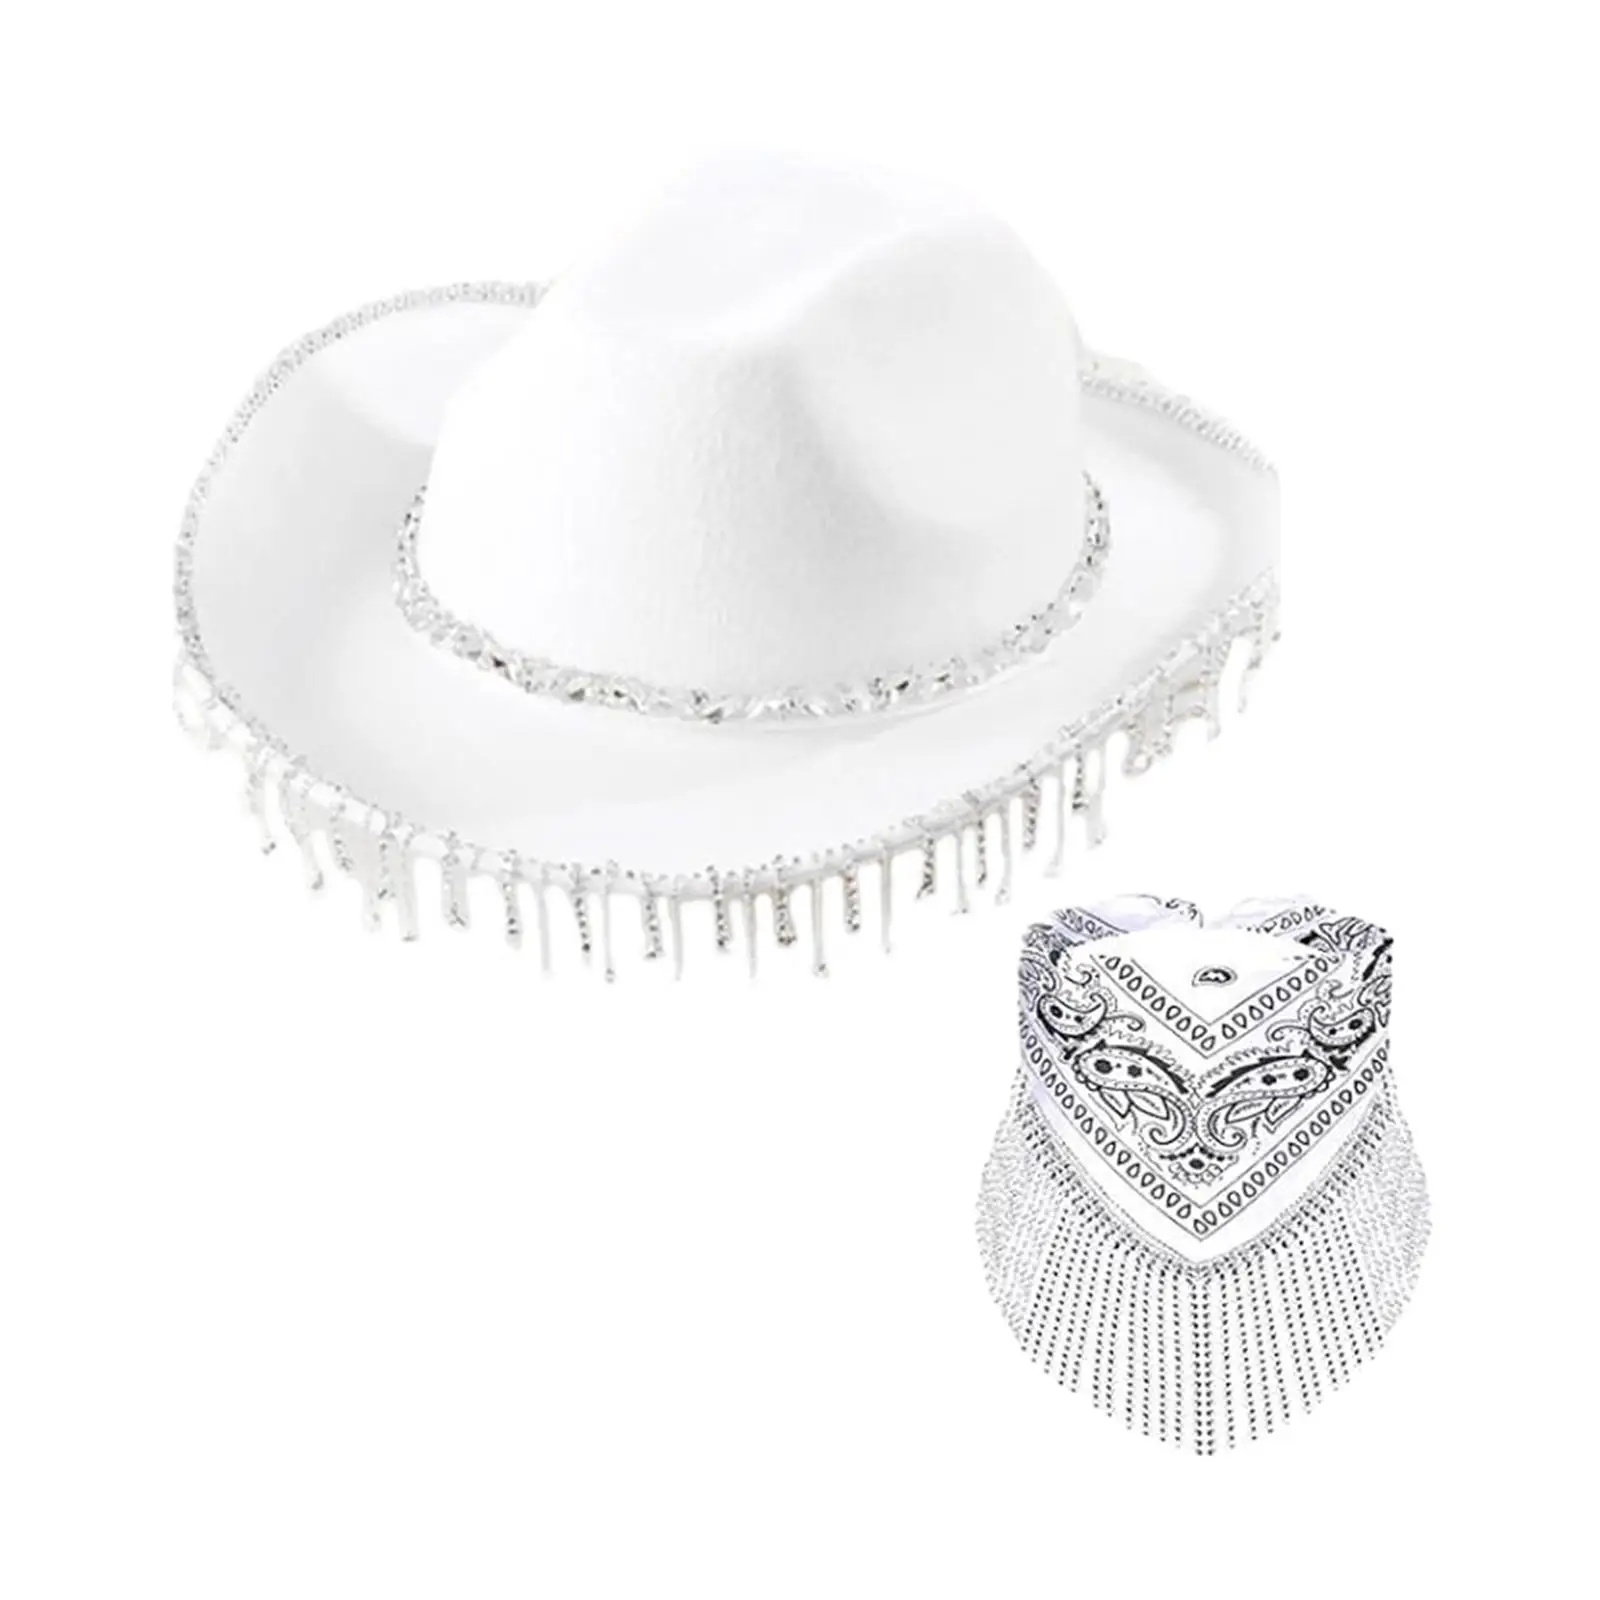 Western Cowboy Hat with Fringed Bandana Western Cowgirl Hat for Women Ladies Girls Wedding Costume Accessories Festival Holiday